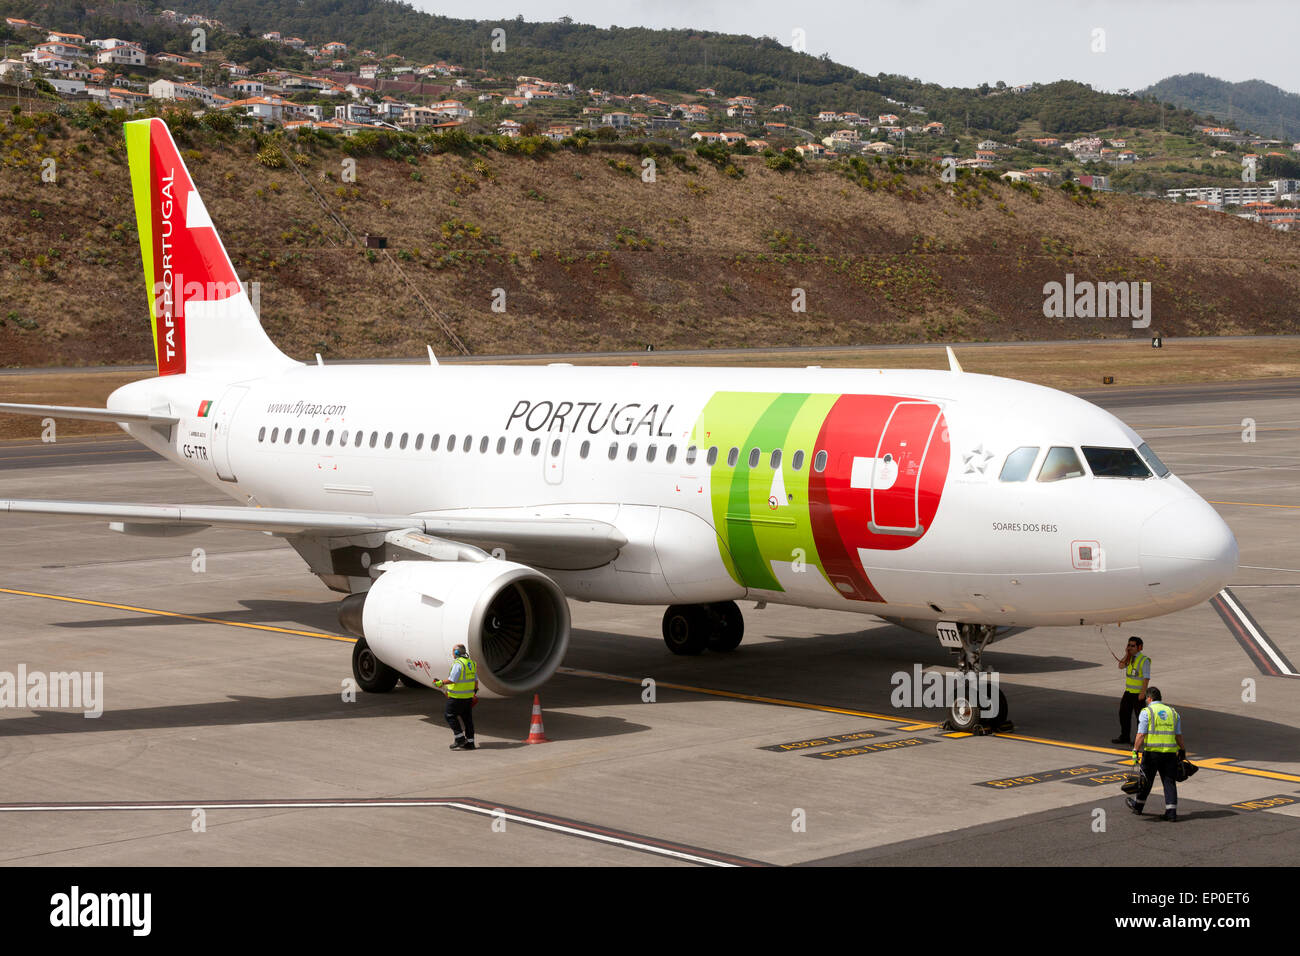 A TAP Portugal Airbus A319 airplane  at Funchal airport, Madeira, Europe Stock Photo